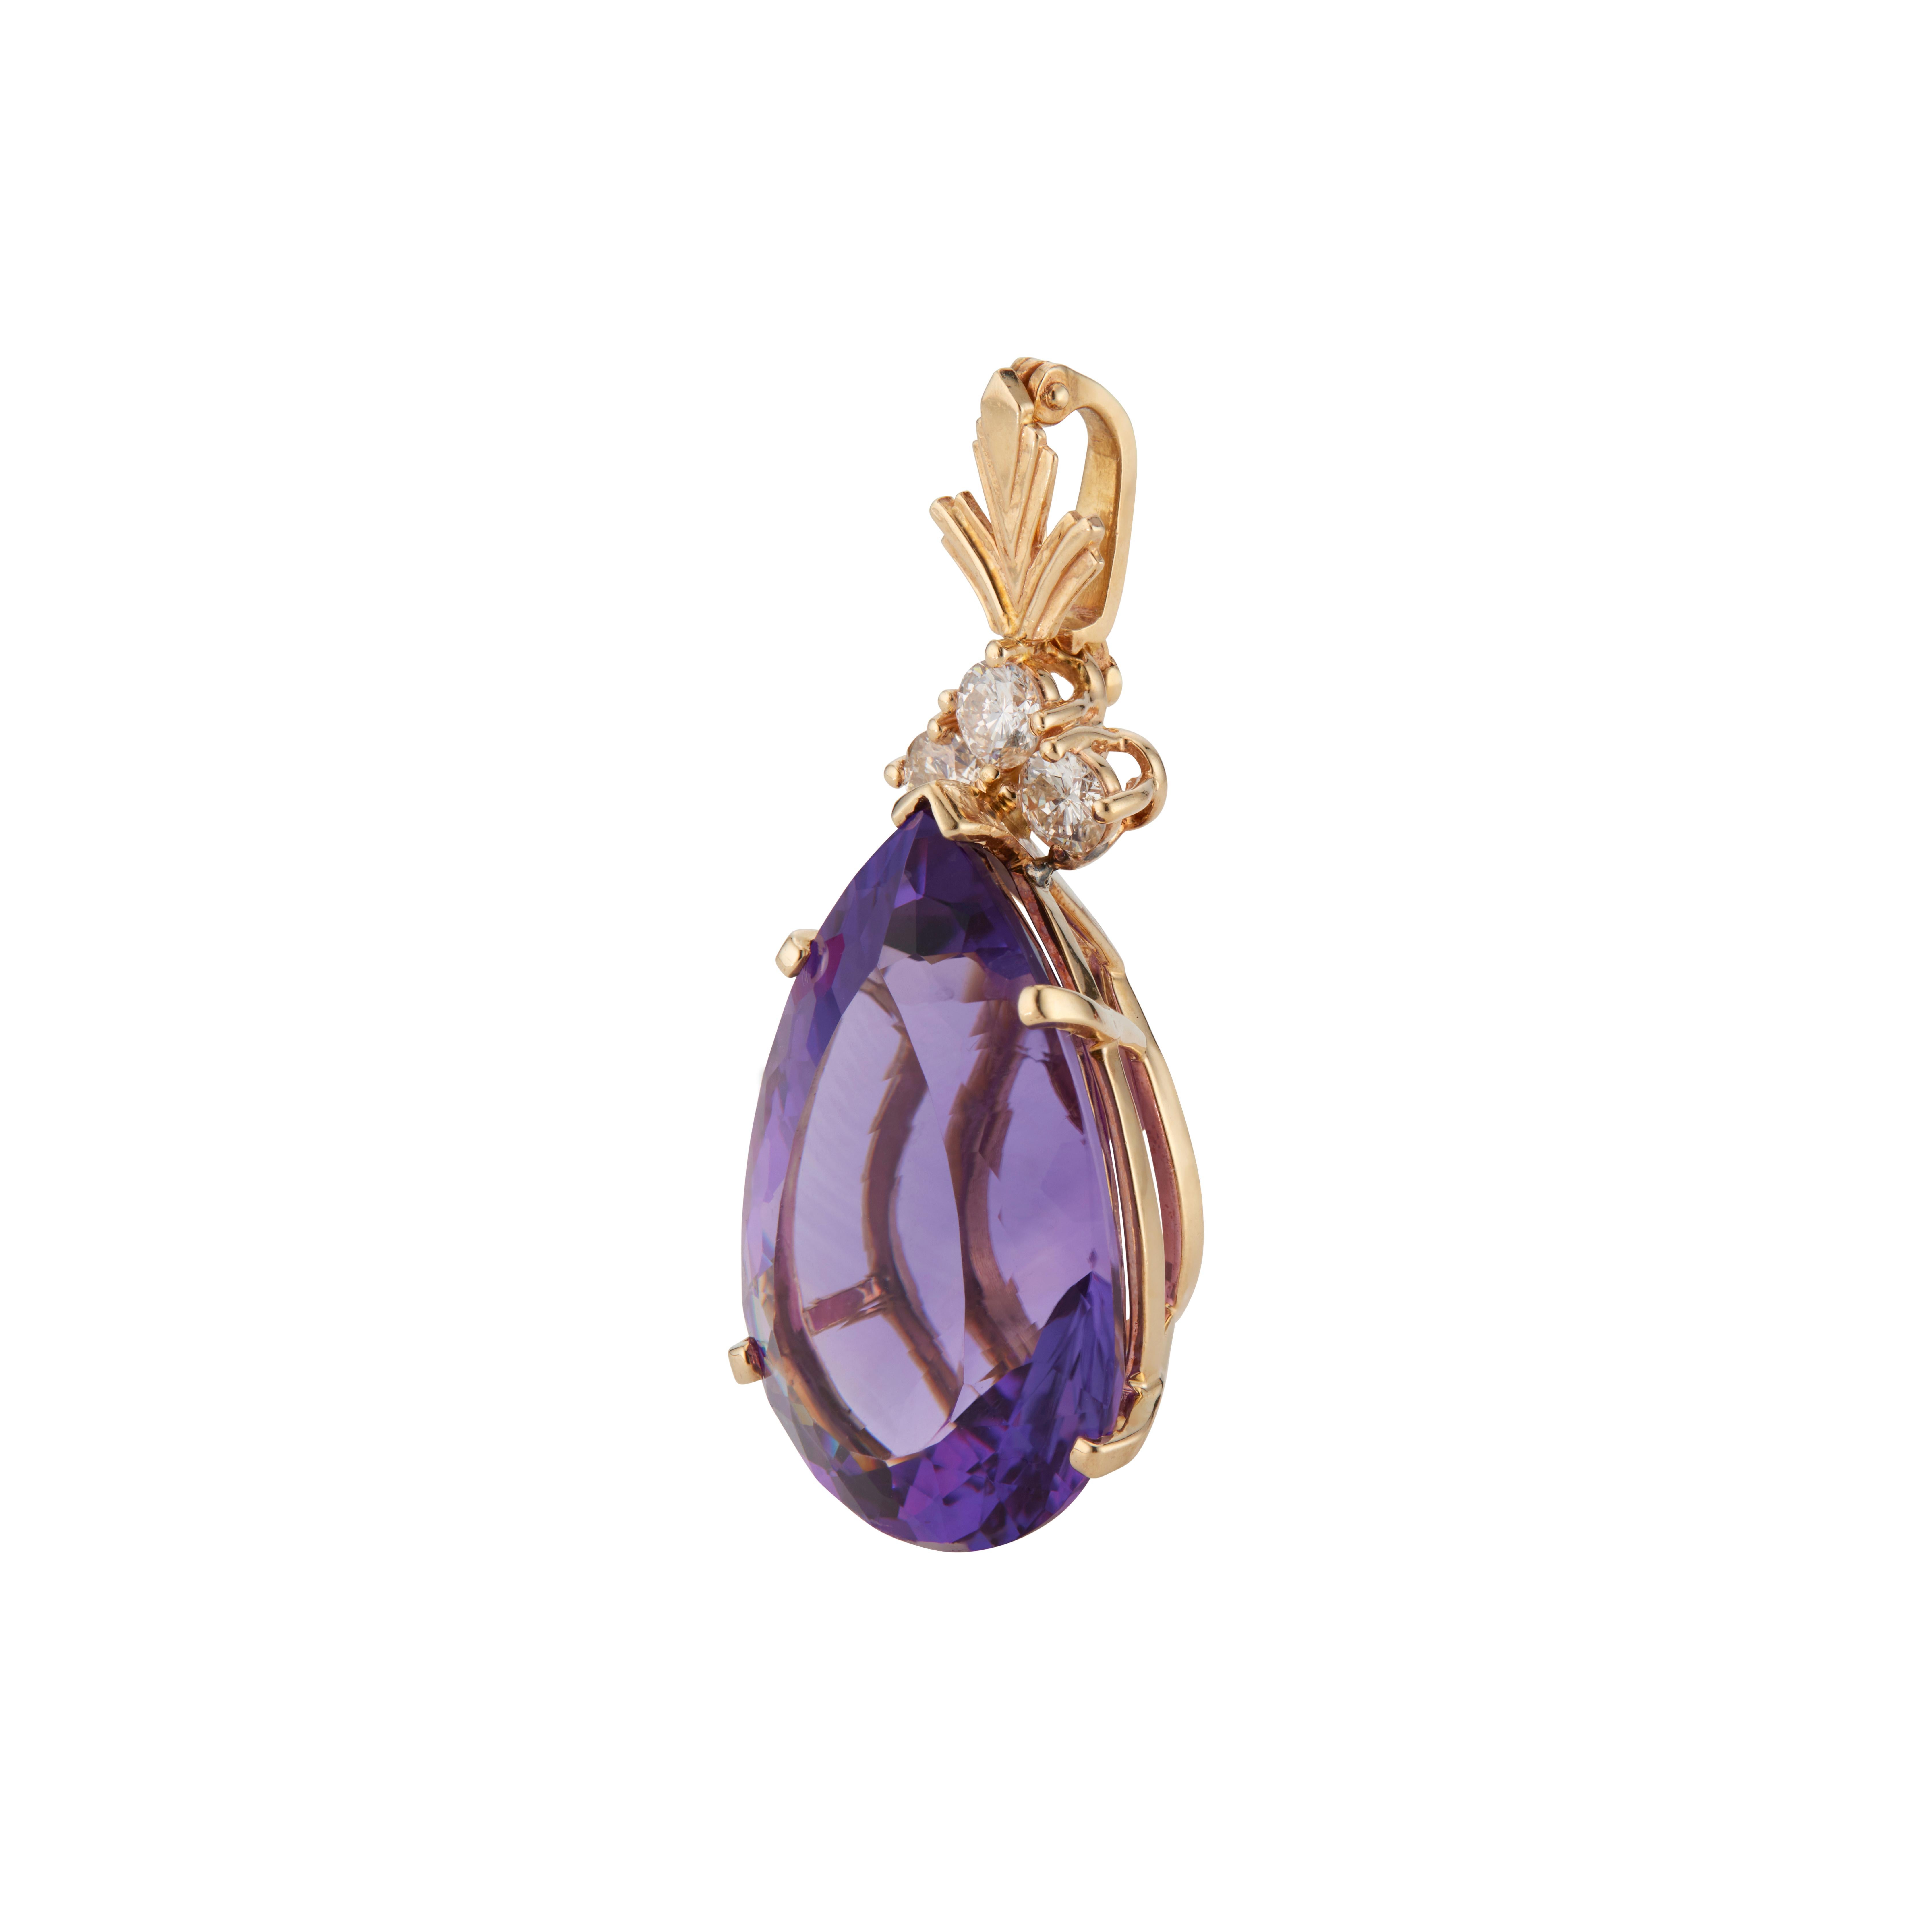 Pear shaped purple Amethyst and diamond pendant. 27.00ct amethyst with 3 bright brilliant cut accent diamonds set in a classic pendant enhancer from the designer, Boom. Hinged enhancer bail.

1 pear shaped genuine bright reddish purple Amethyst,